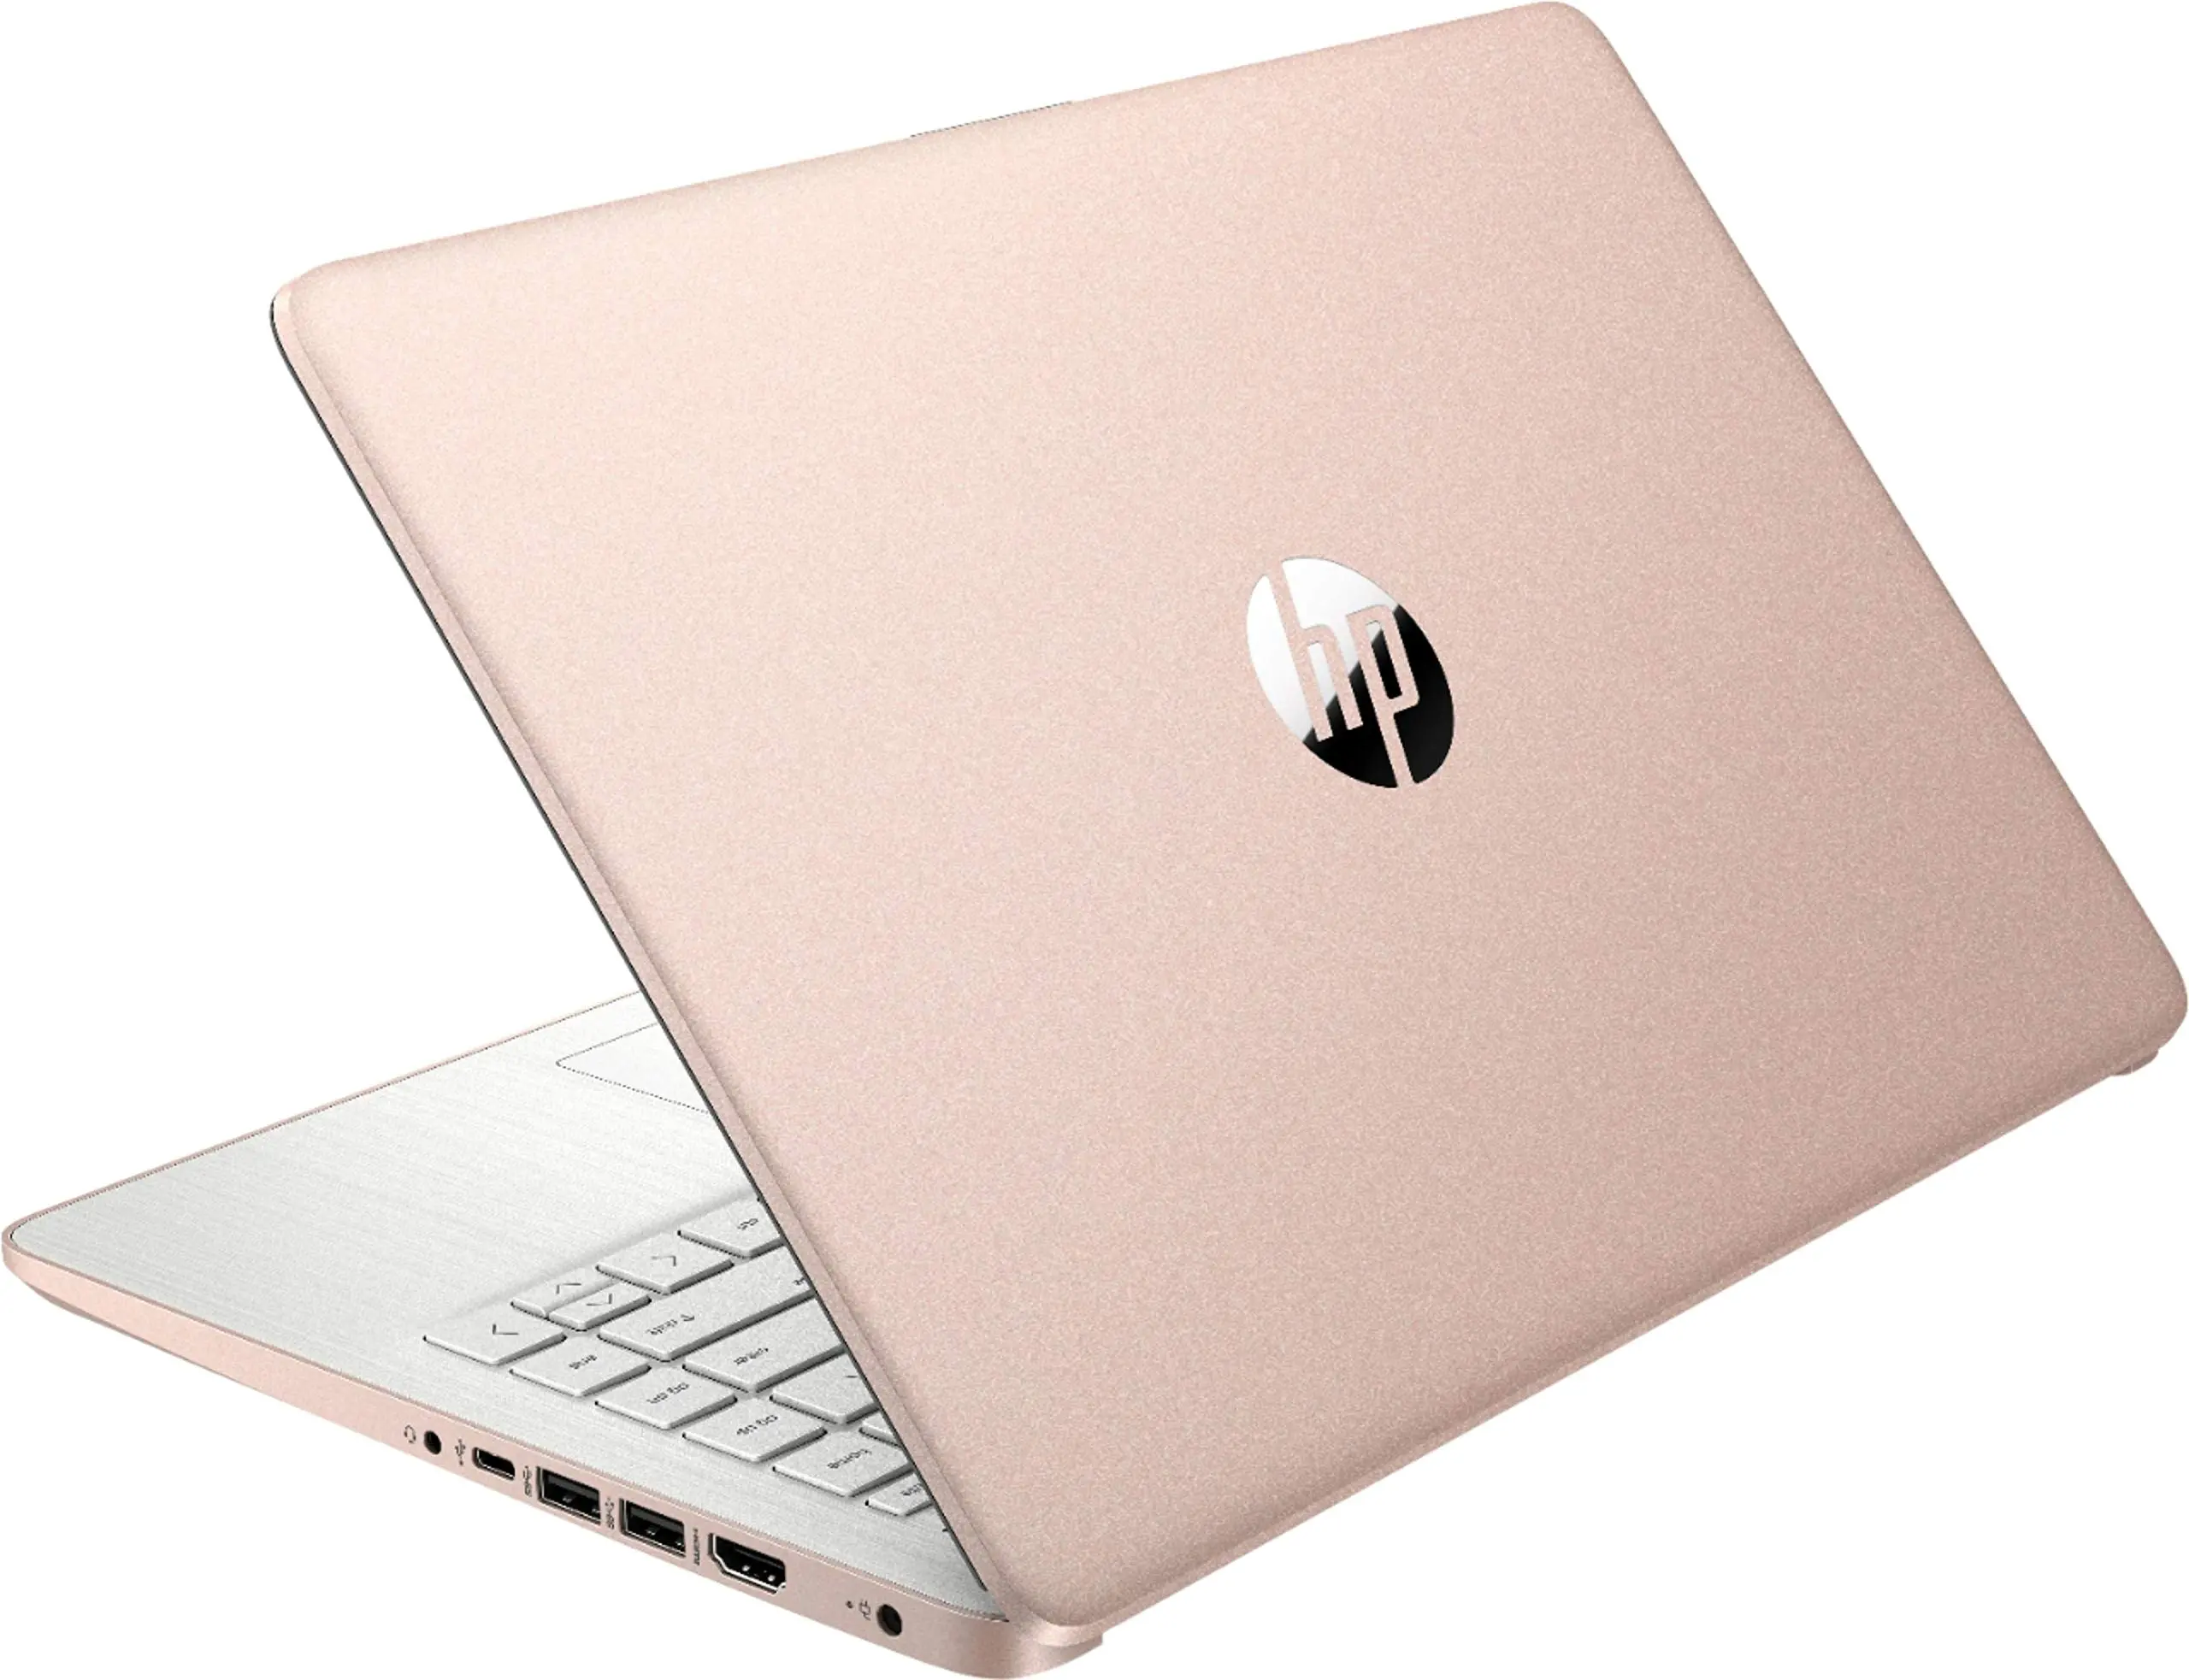 hewlett packard 14 inch stream cloudbook - What is a stream laptop used for